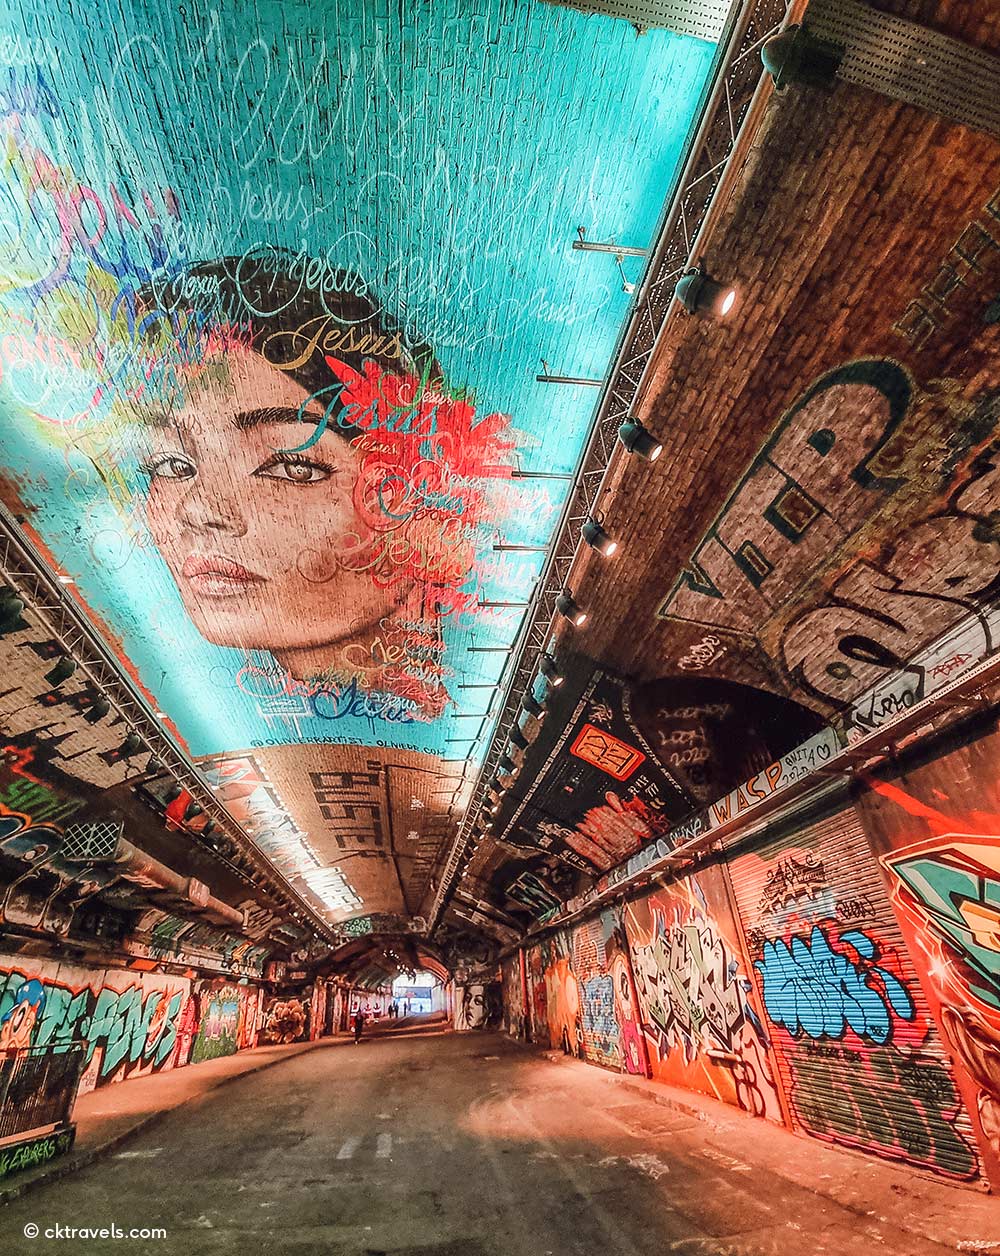 The Leake Street Graffiti Tunnel Free thing to do in London